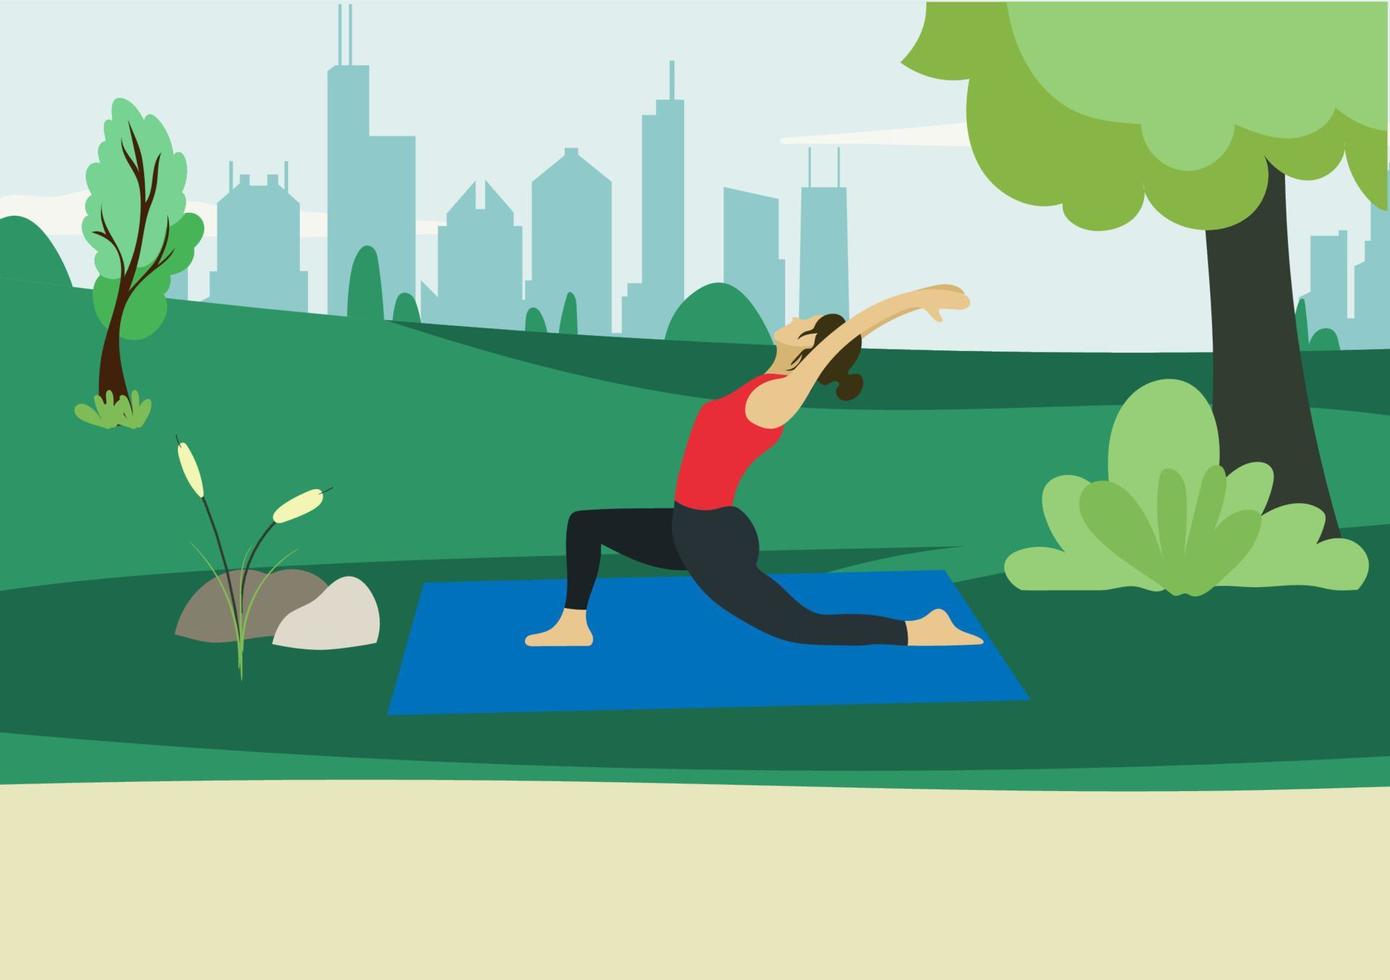 Young girl in yoga pose on open air. Exercise in a city park, trees and town on the background. Healthy lifestyle concept. Vector illustration in flat style.